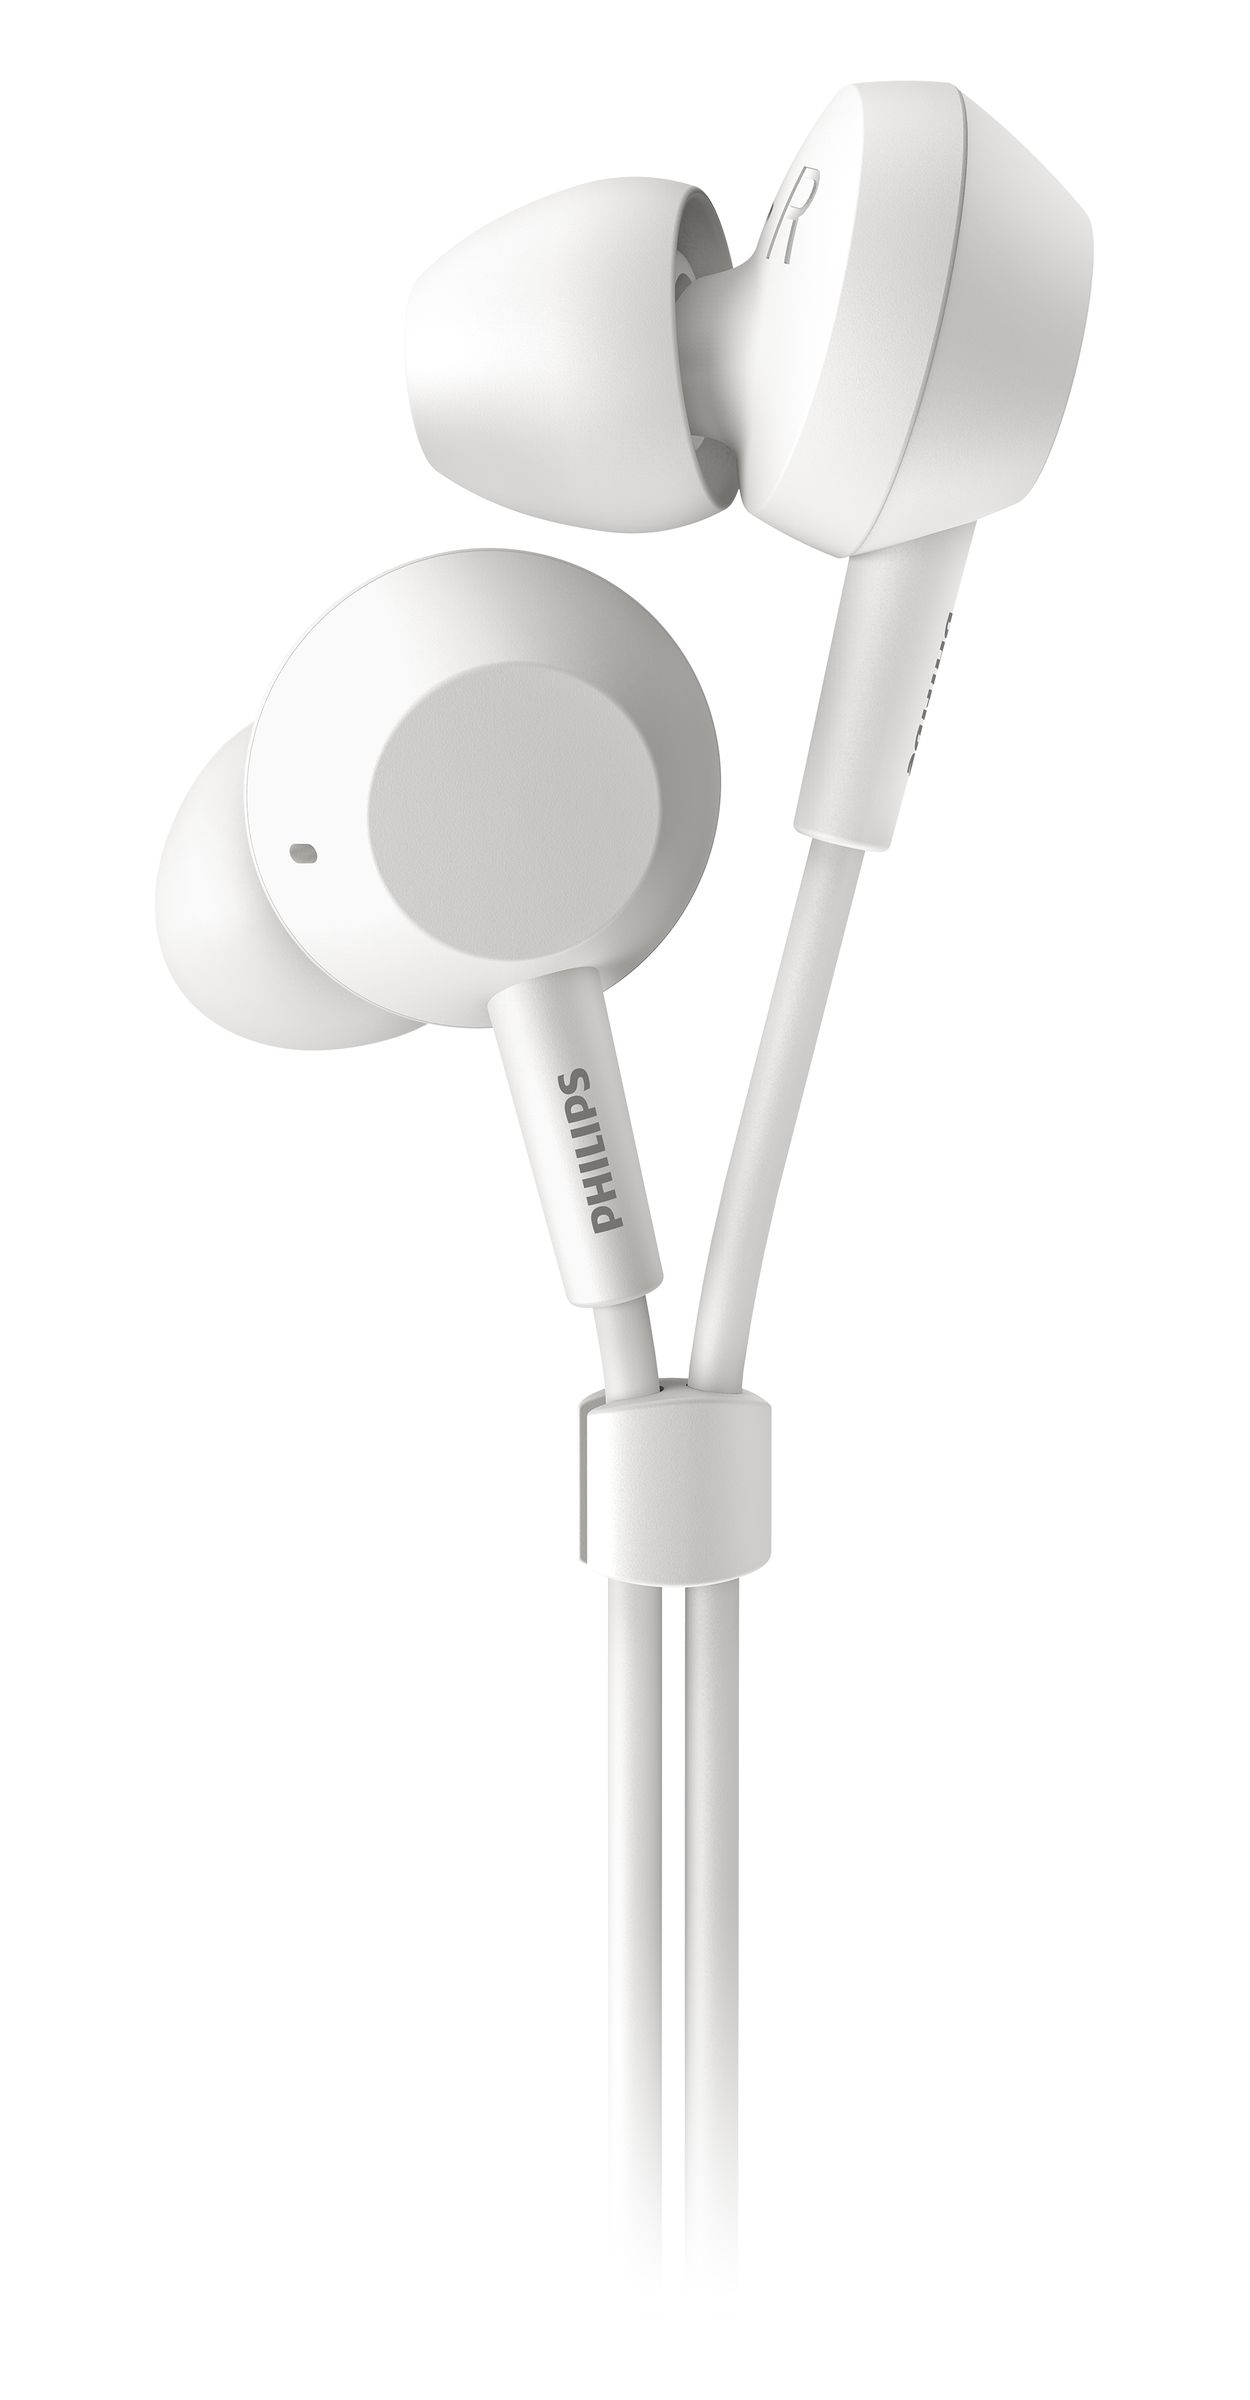 Philips Auriculares intrauditivos con cable - Blanco (TAE1105WT/00